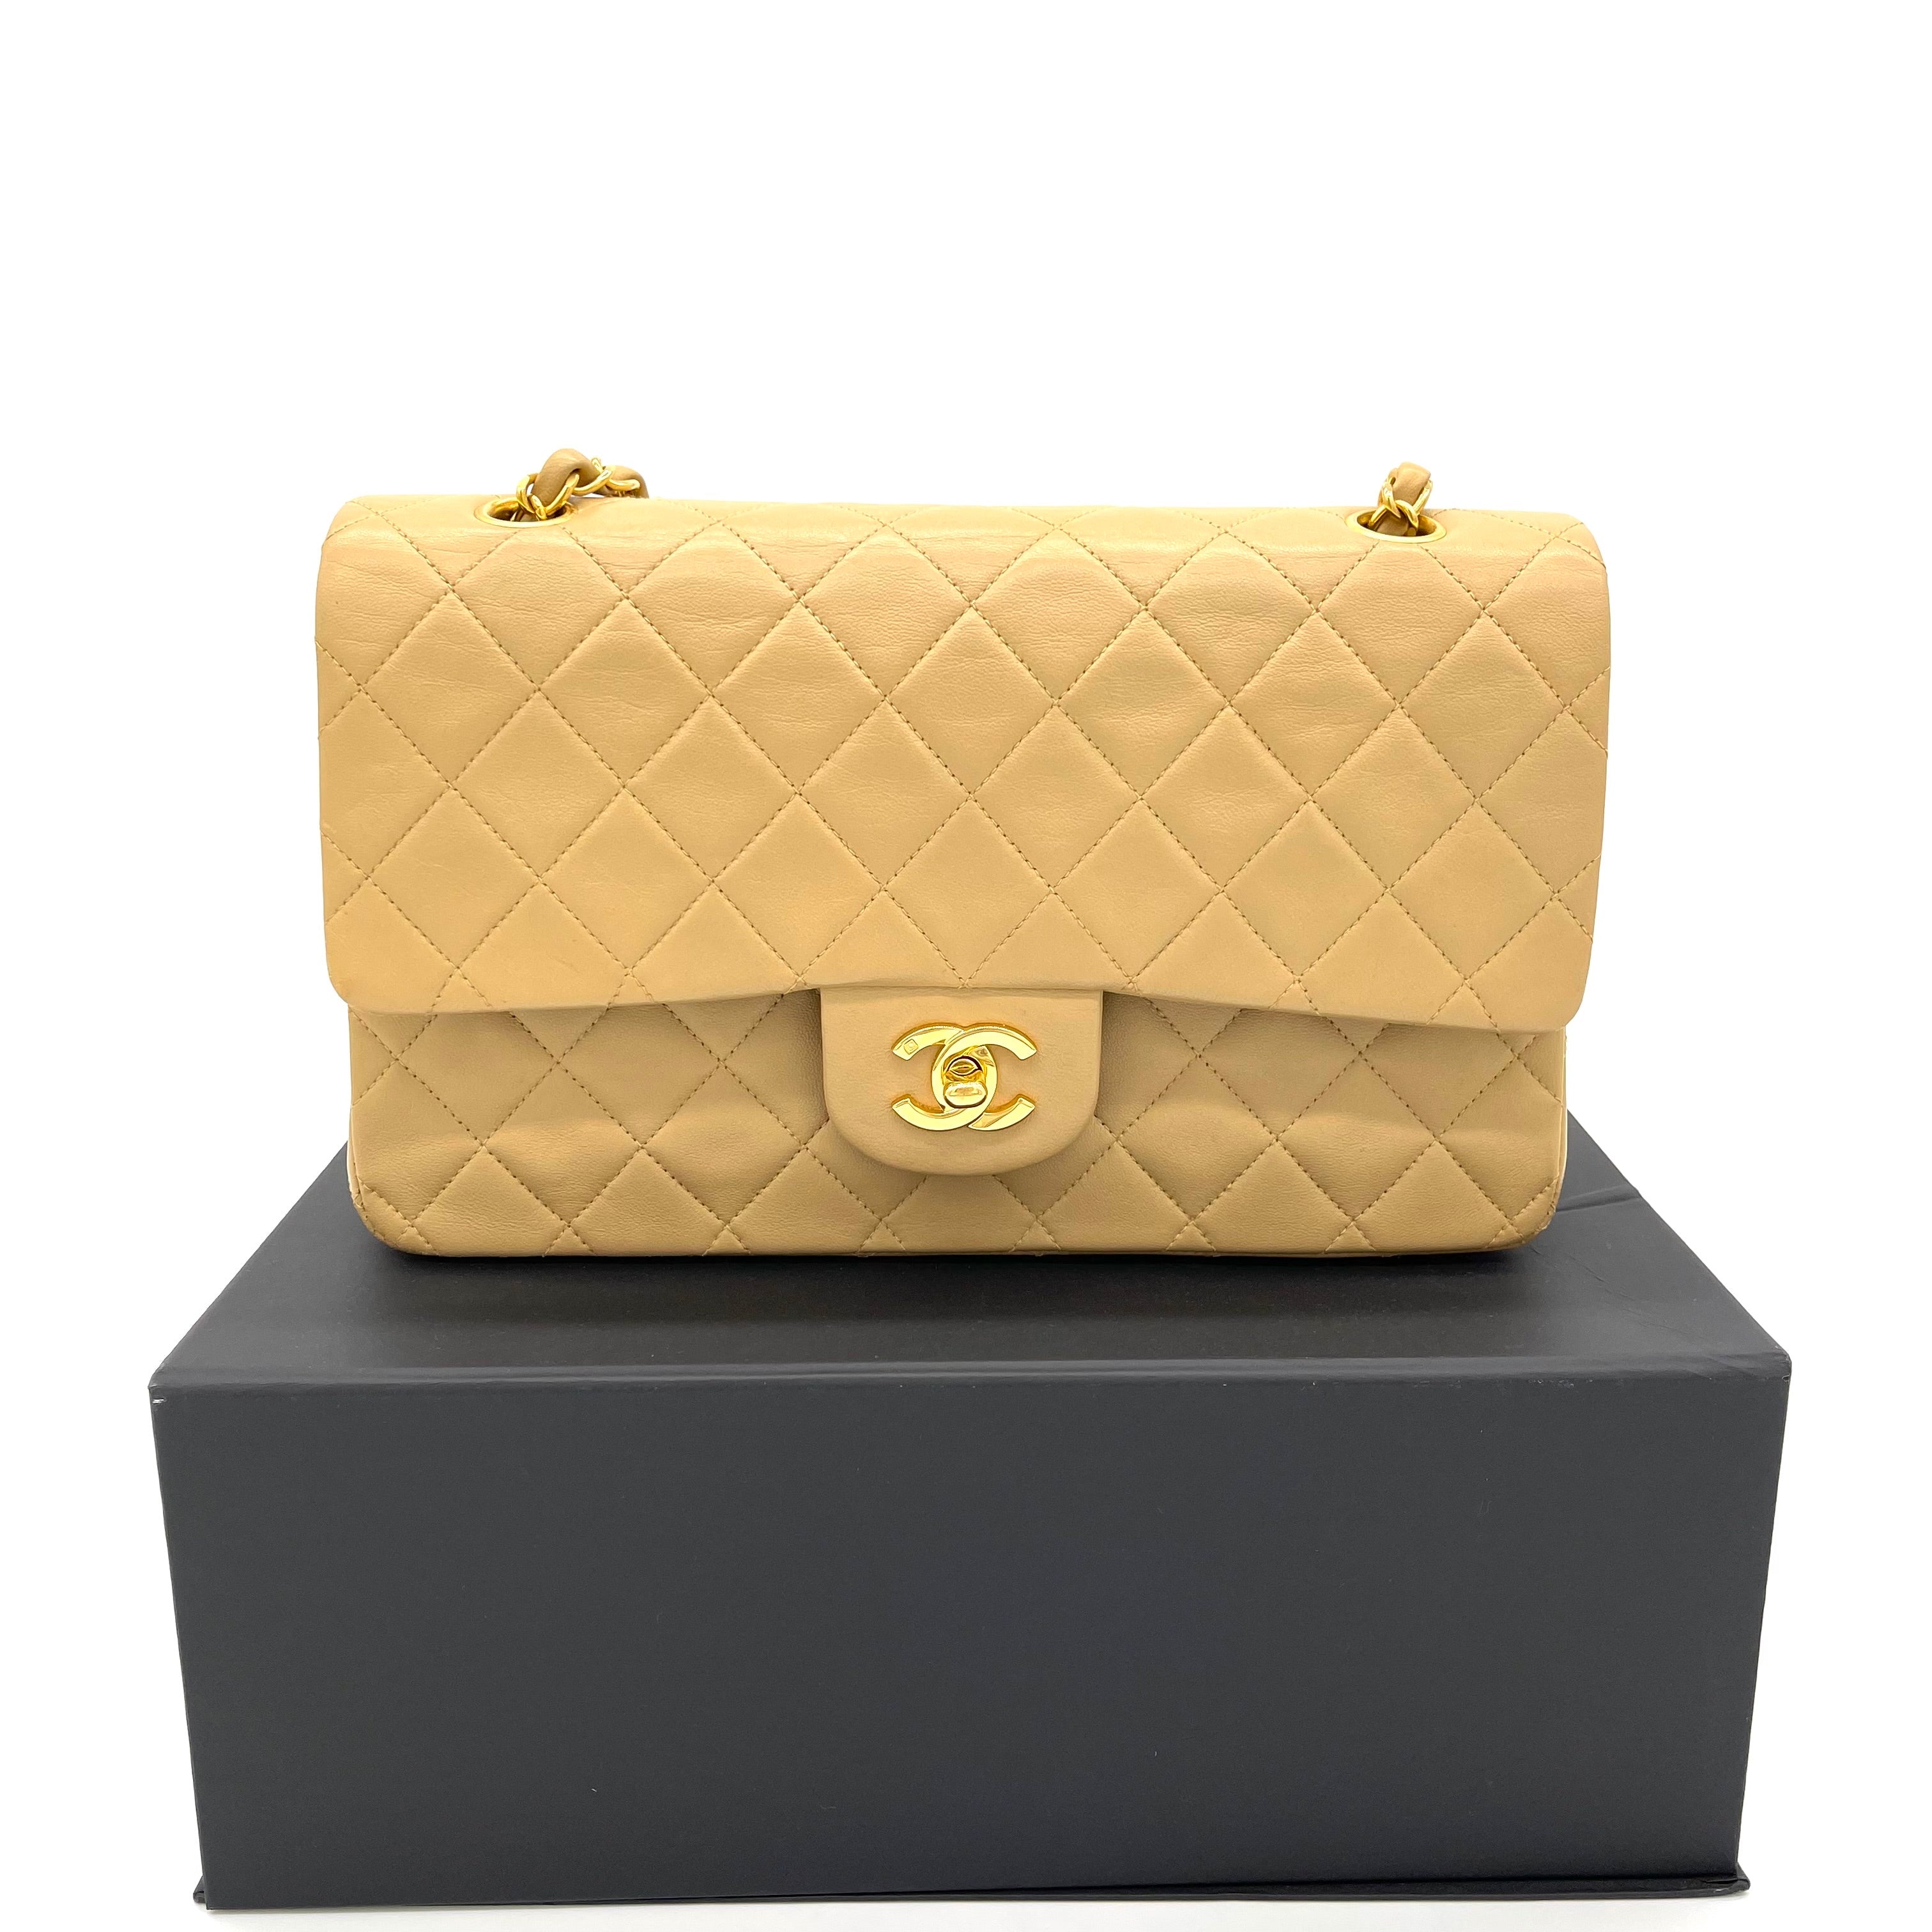 CHANEL Vintage Lambskin Quilted Medium Double Flap Beige